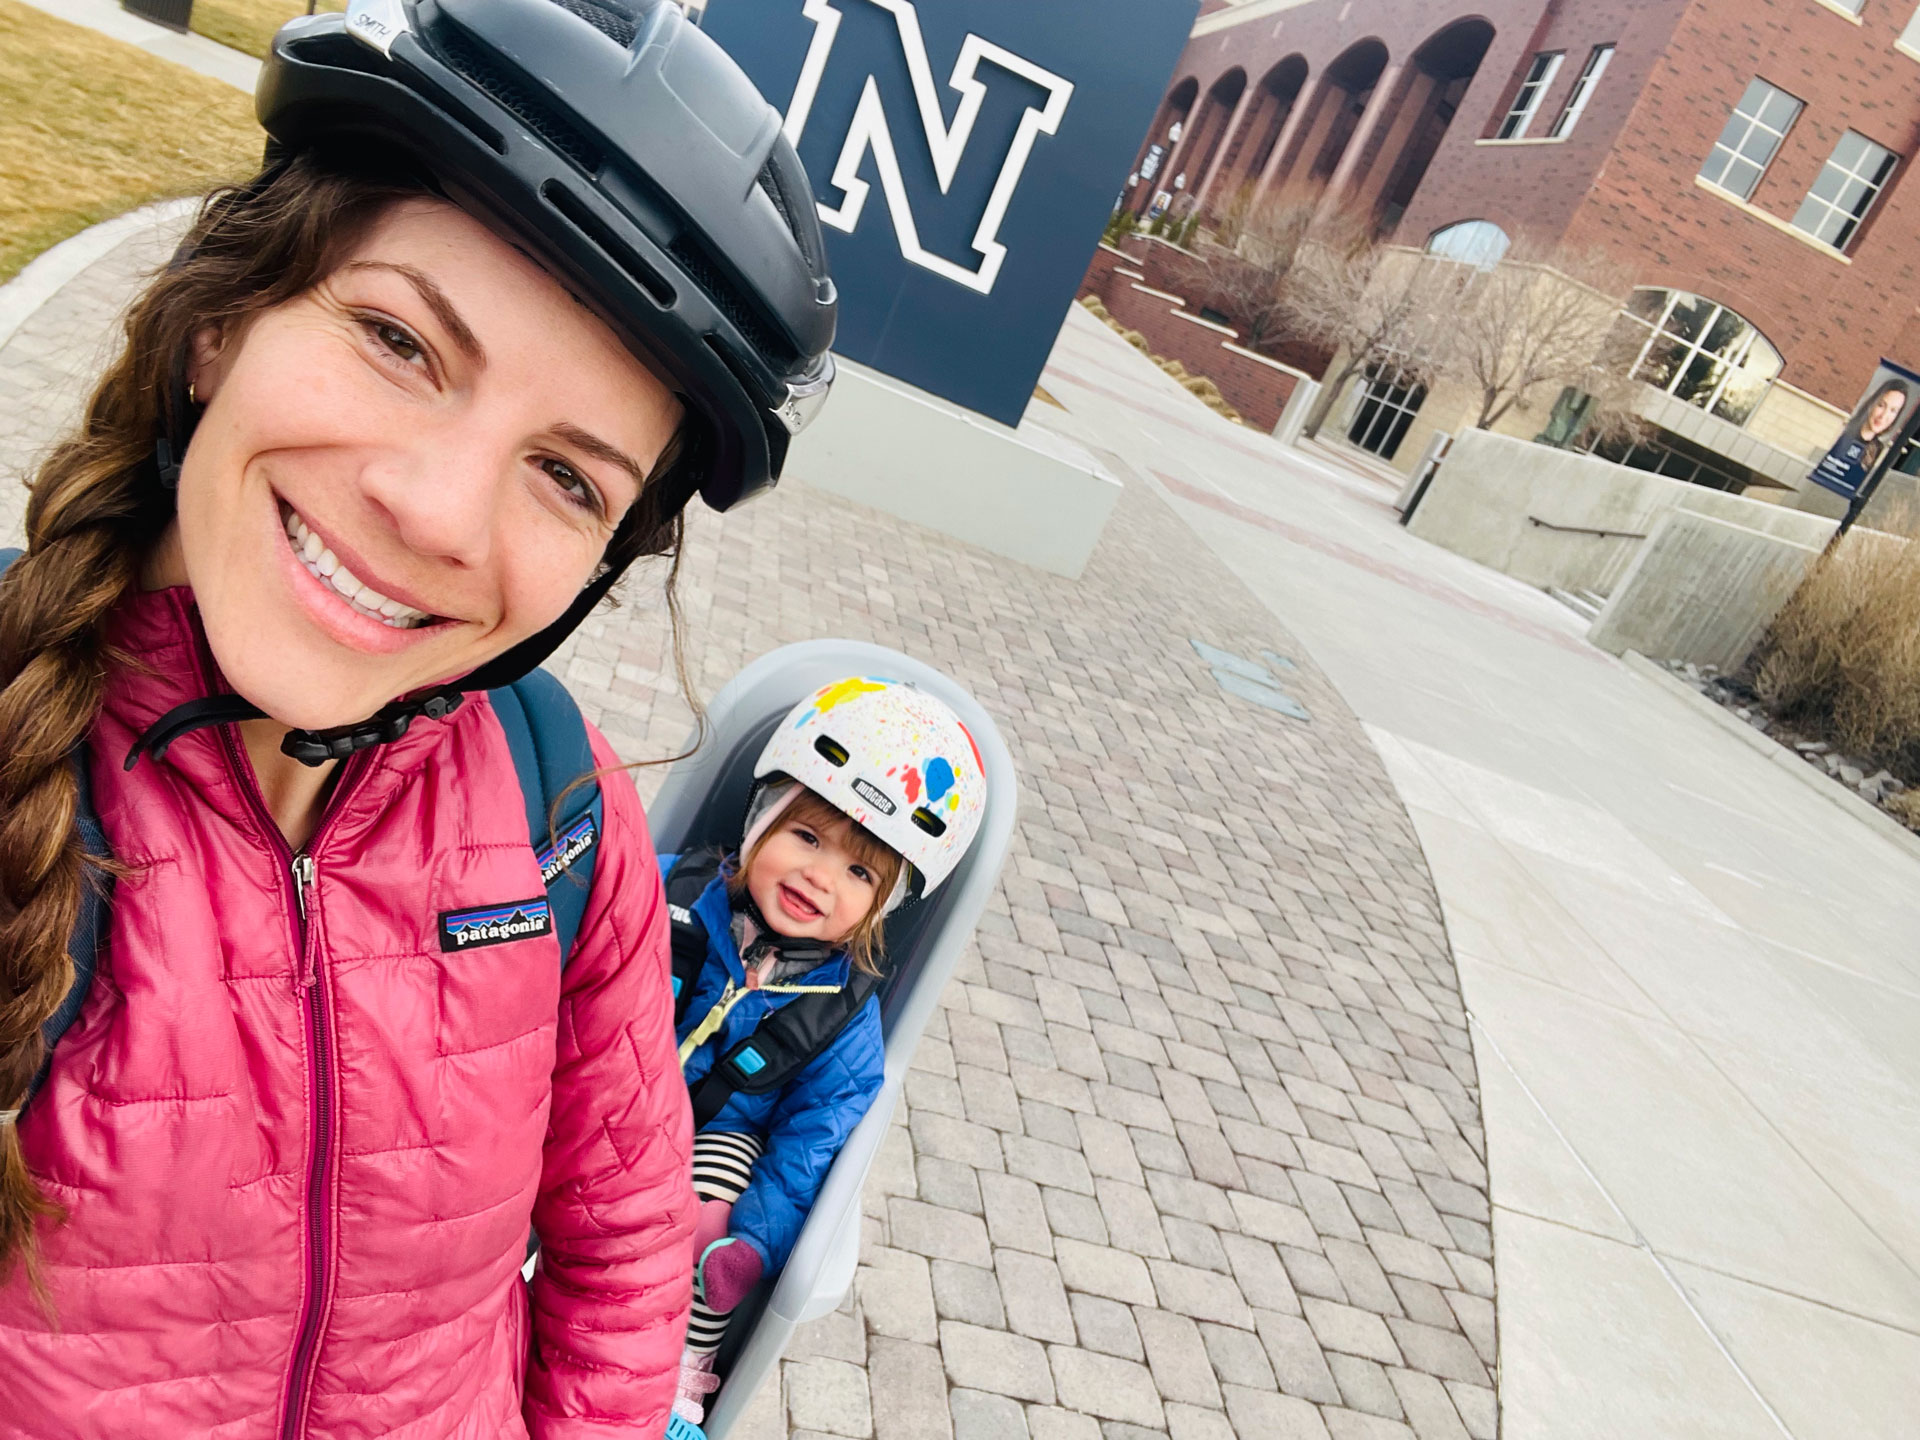 Jennifer Kent and her daughter on a bike on campus.